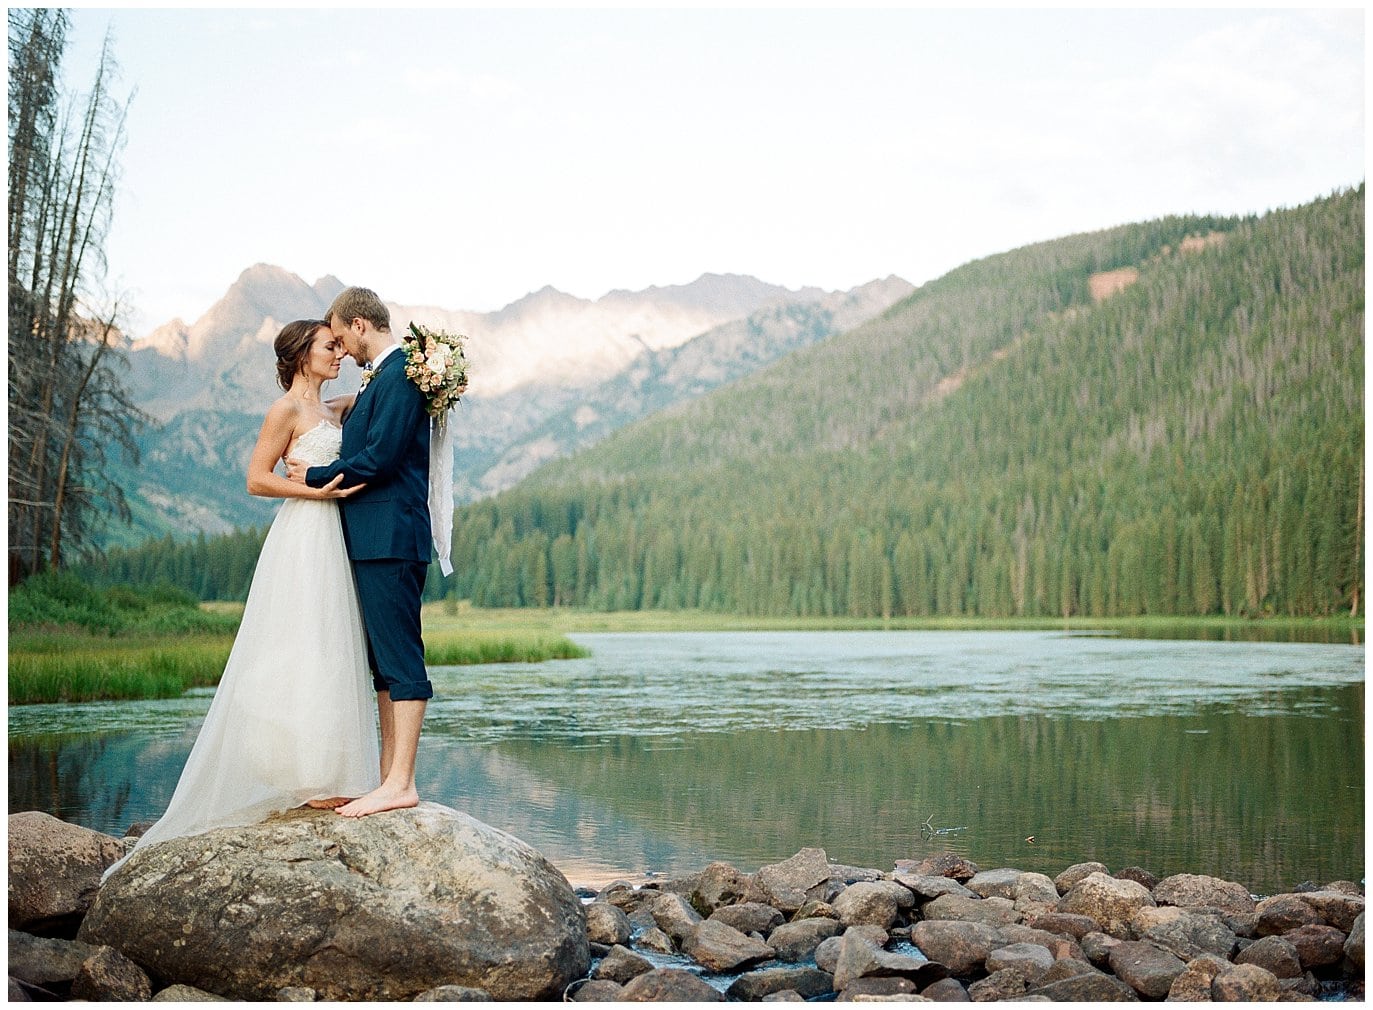 bride and groom on rocks by alpine lake during sunset at Piney River Ranch intimate wedding by Beaver Creek wedding photographer Jennie Crate Photographer